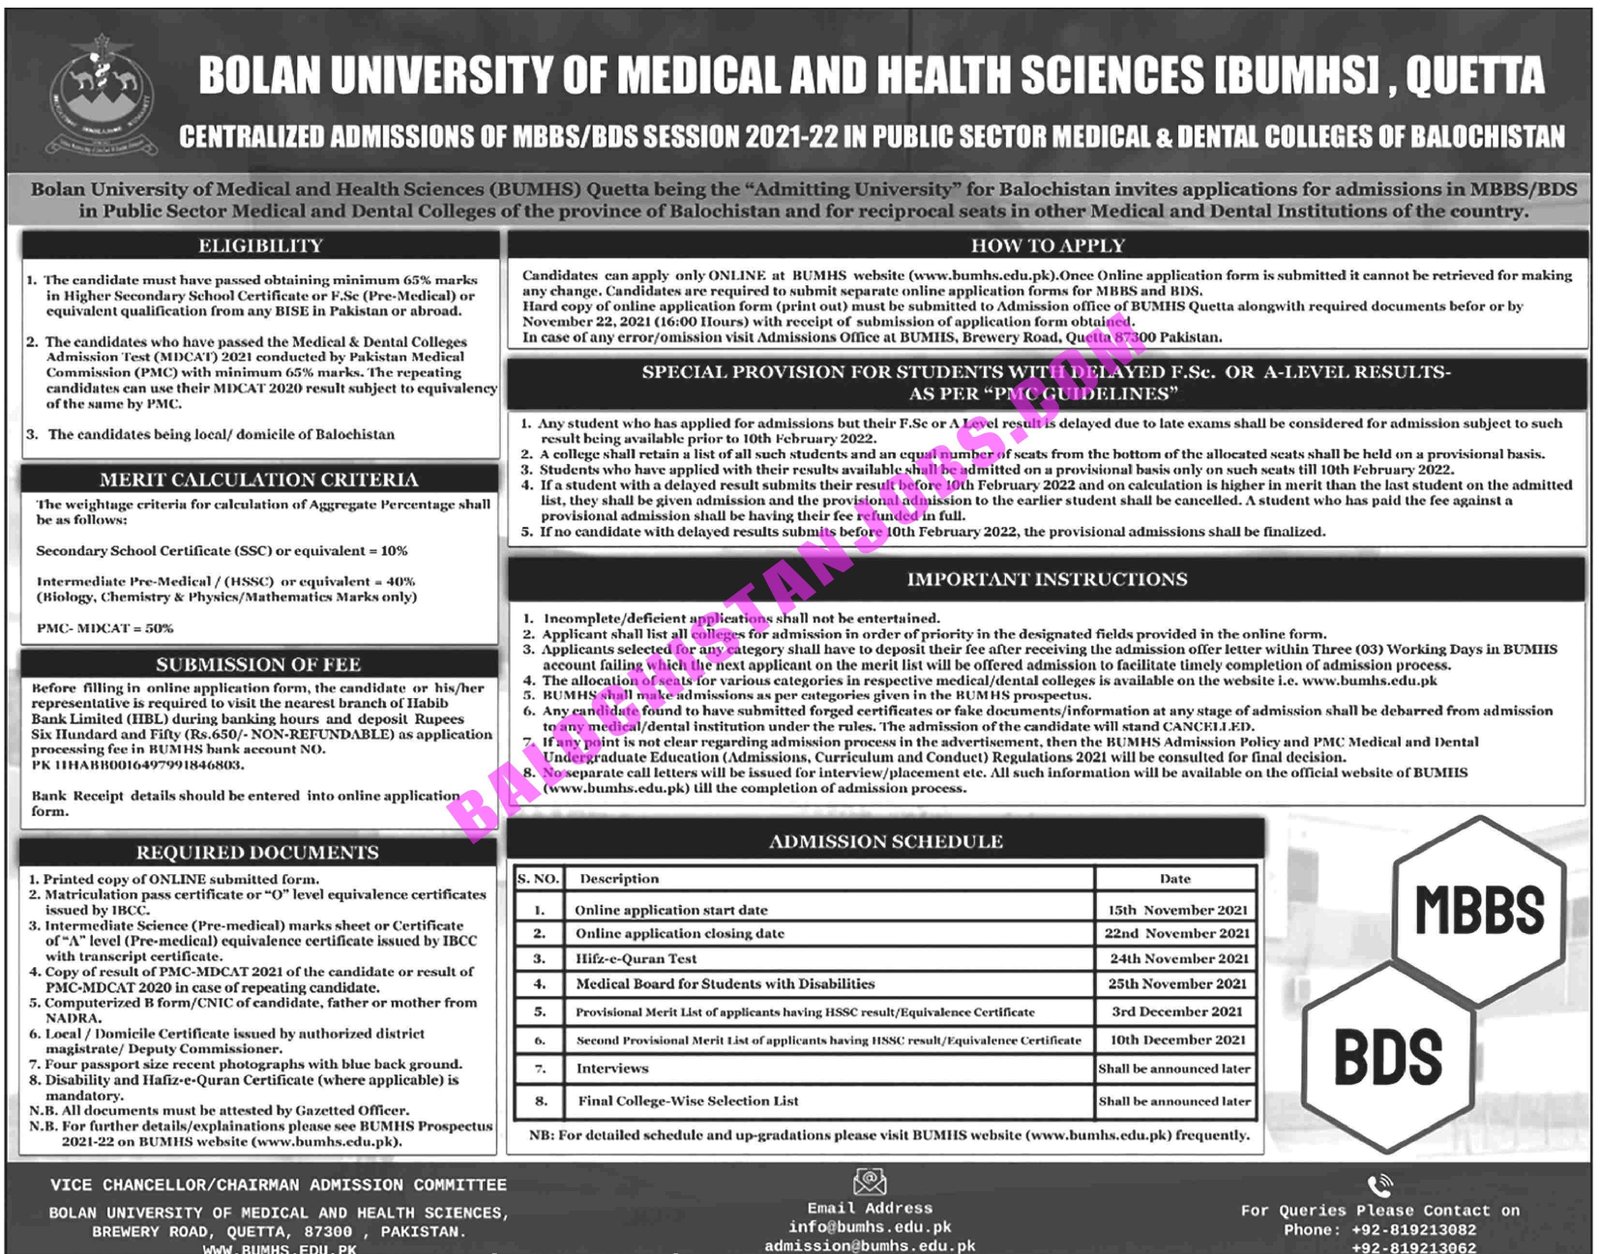 Bolan University of Medical and Health Sciences BUMHS Quetta Admissions 2021